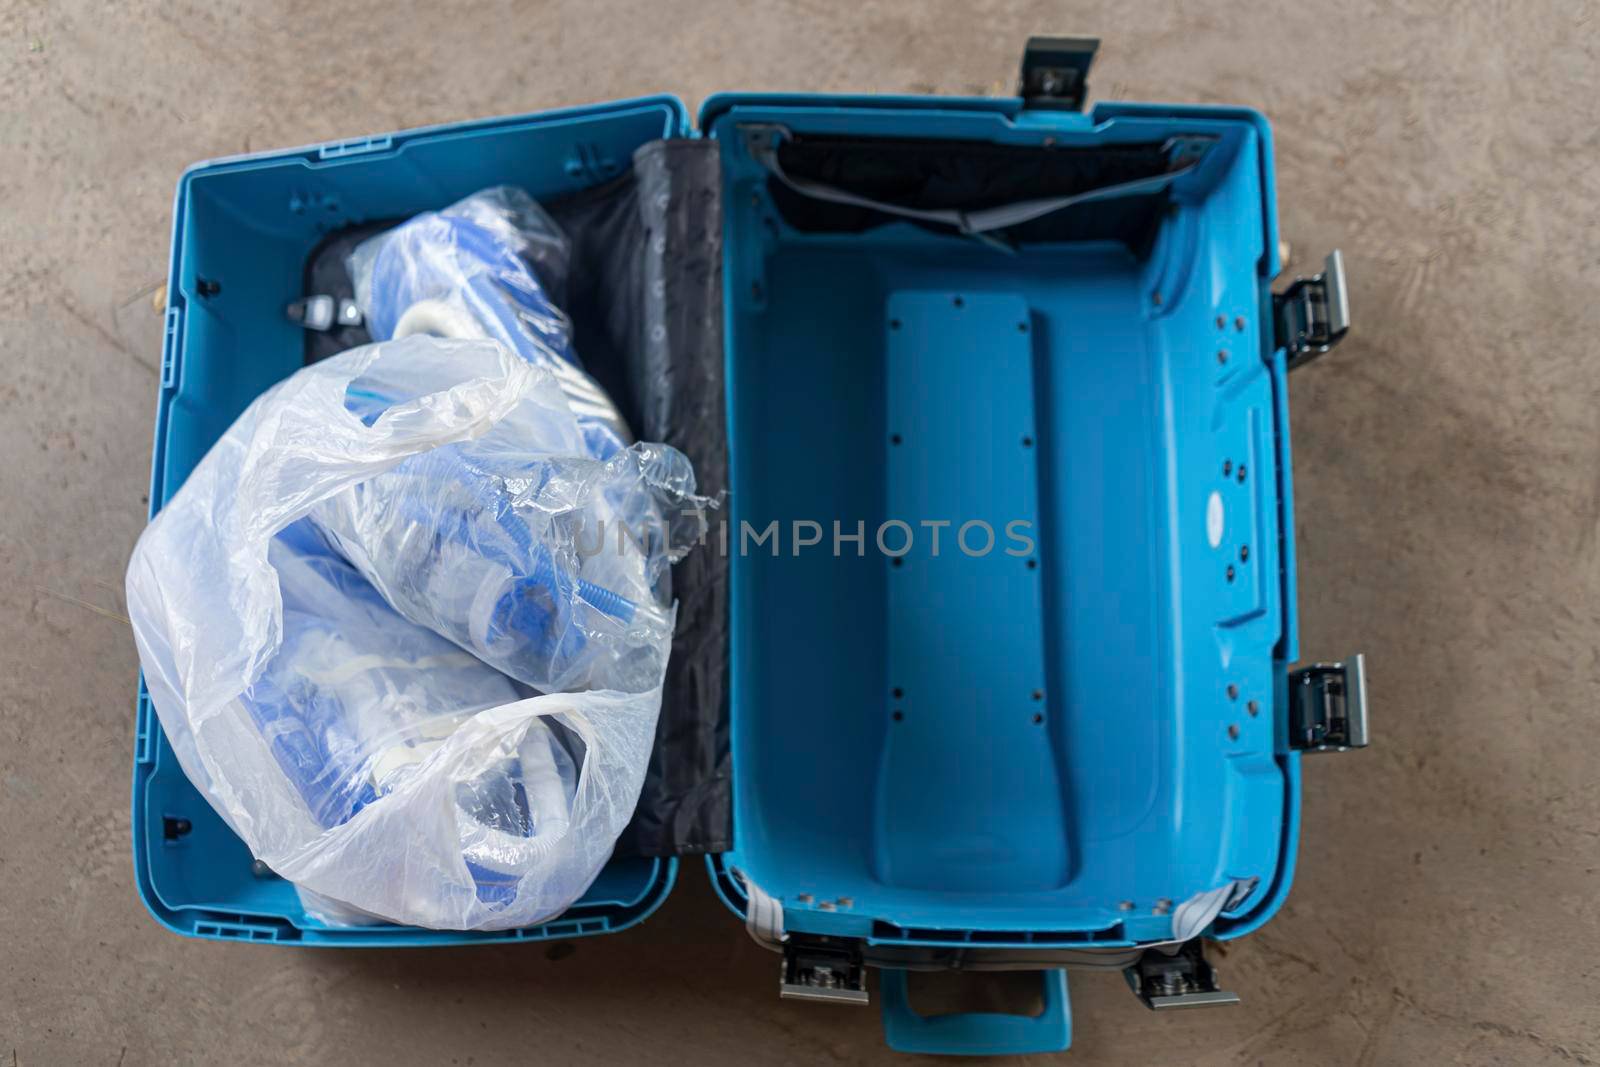 Blue plastic box Used for carrying medical items. by sandyman